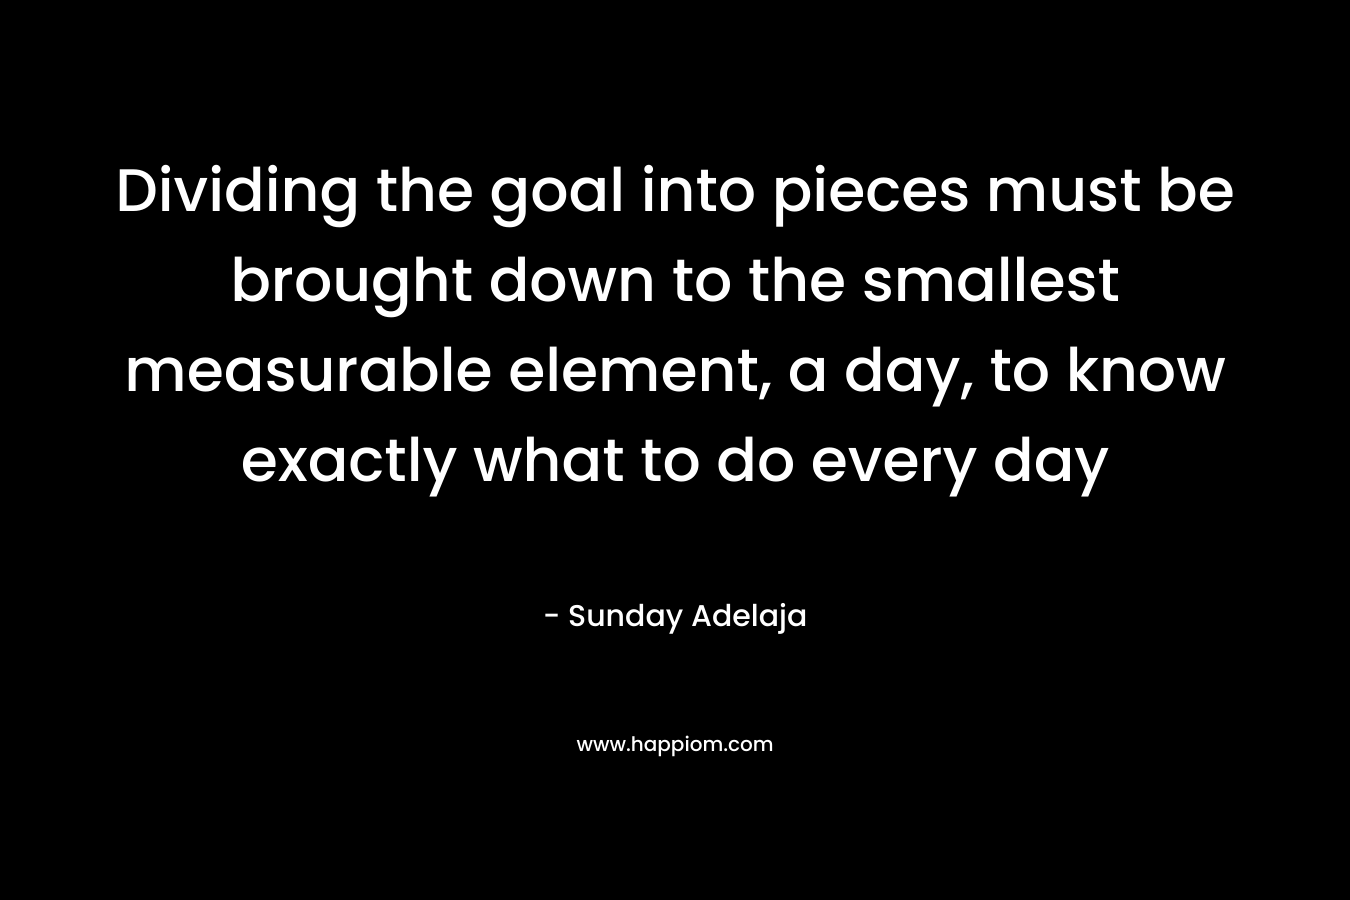 Dividing the goal into pieces must be brought down to the smallest measurable element, a day, to know exactly what to do every day